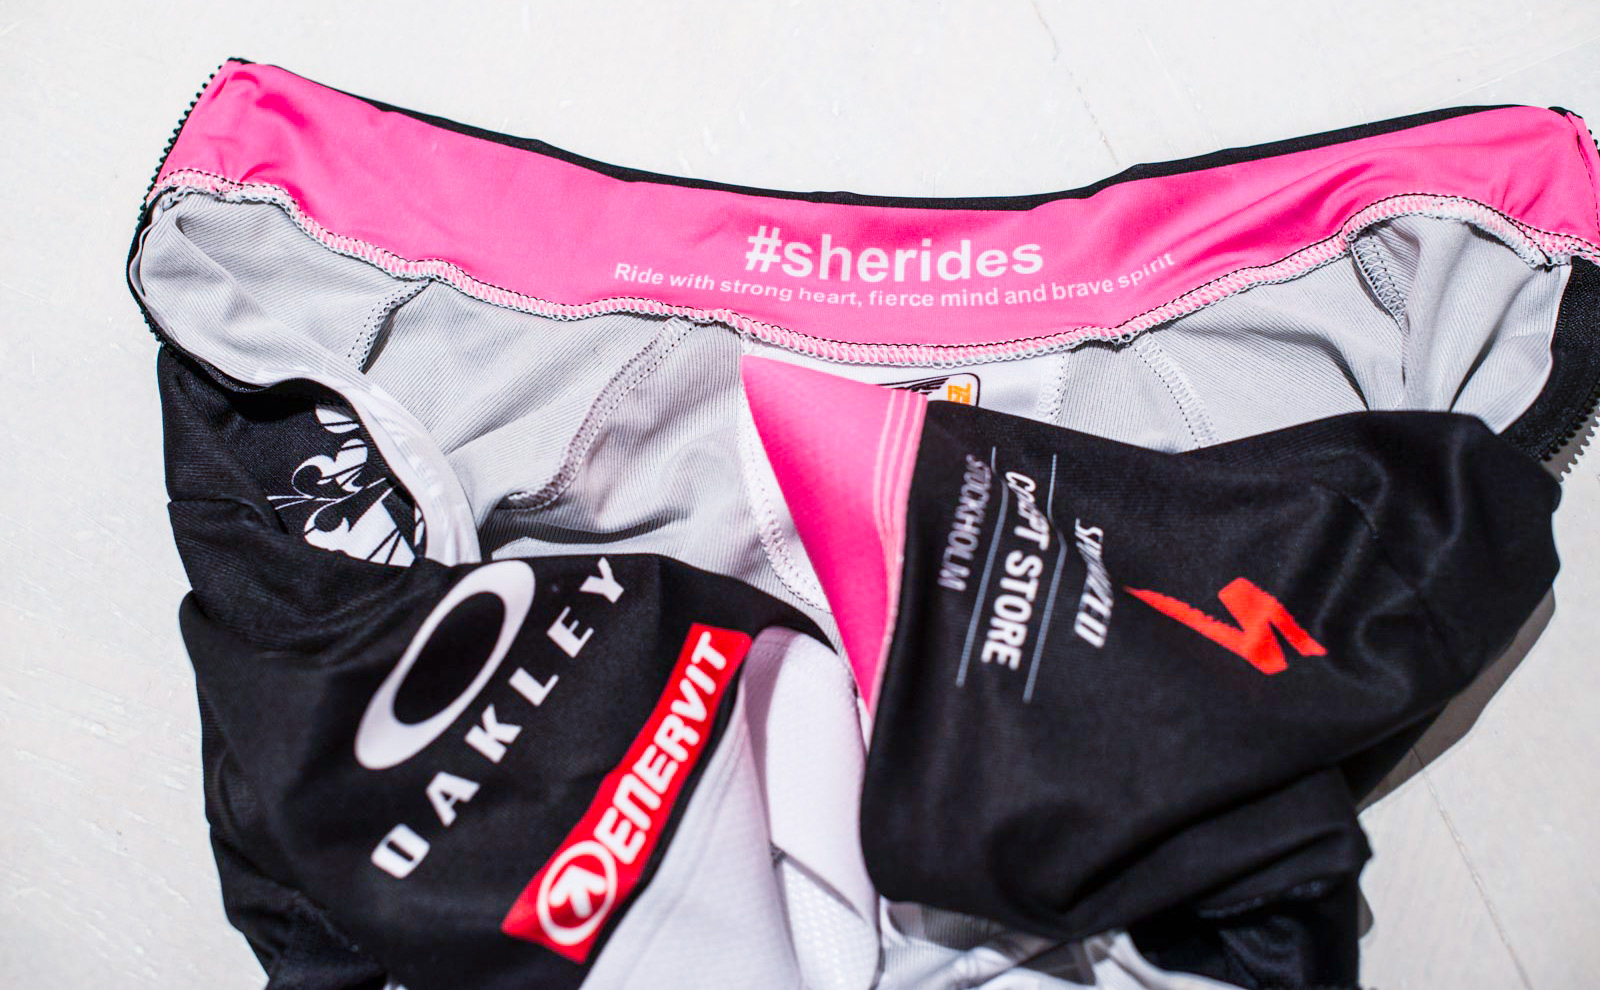 she-rides-cycling-gear-7